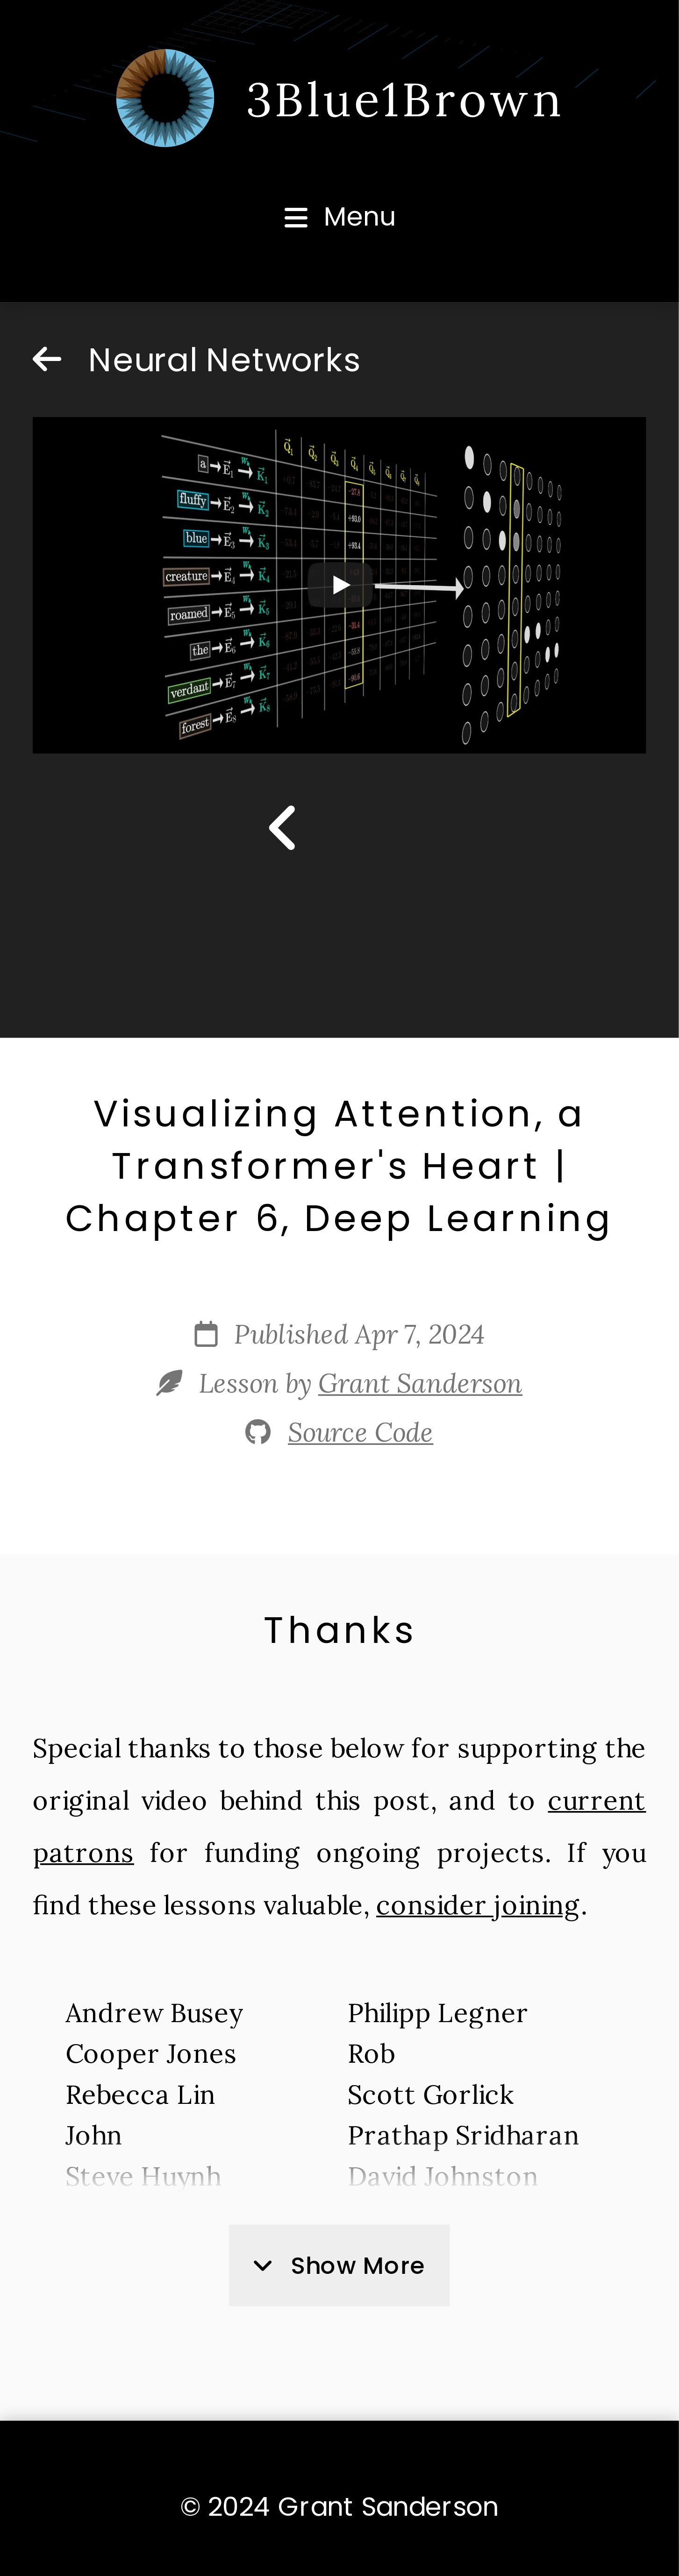 Visualizing Attention, a Transformer's Heart [video]